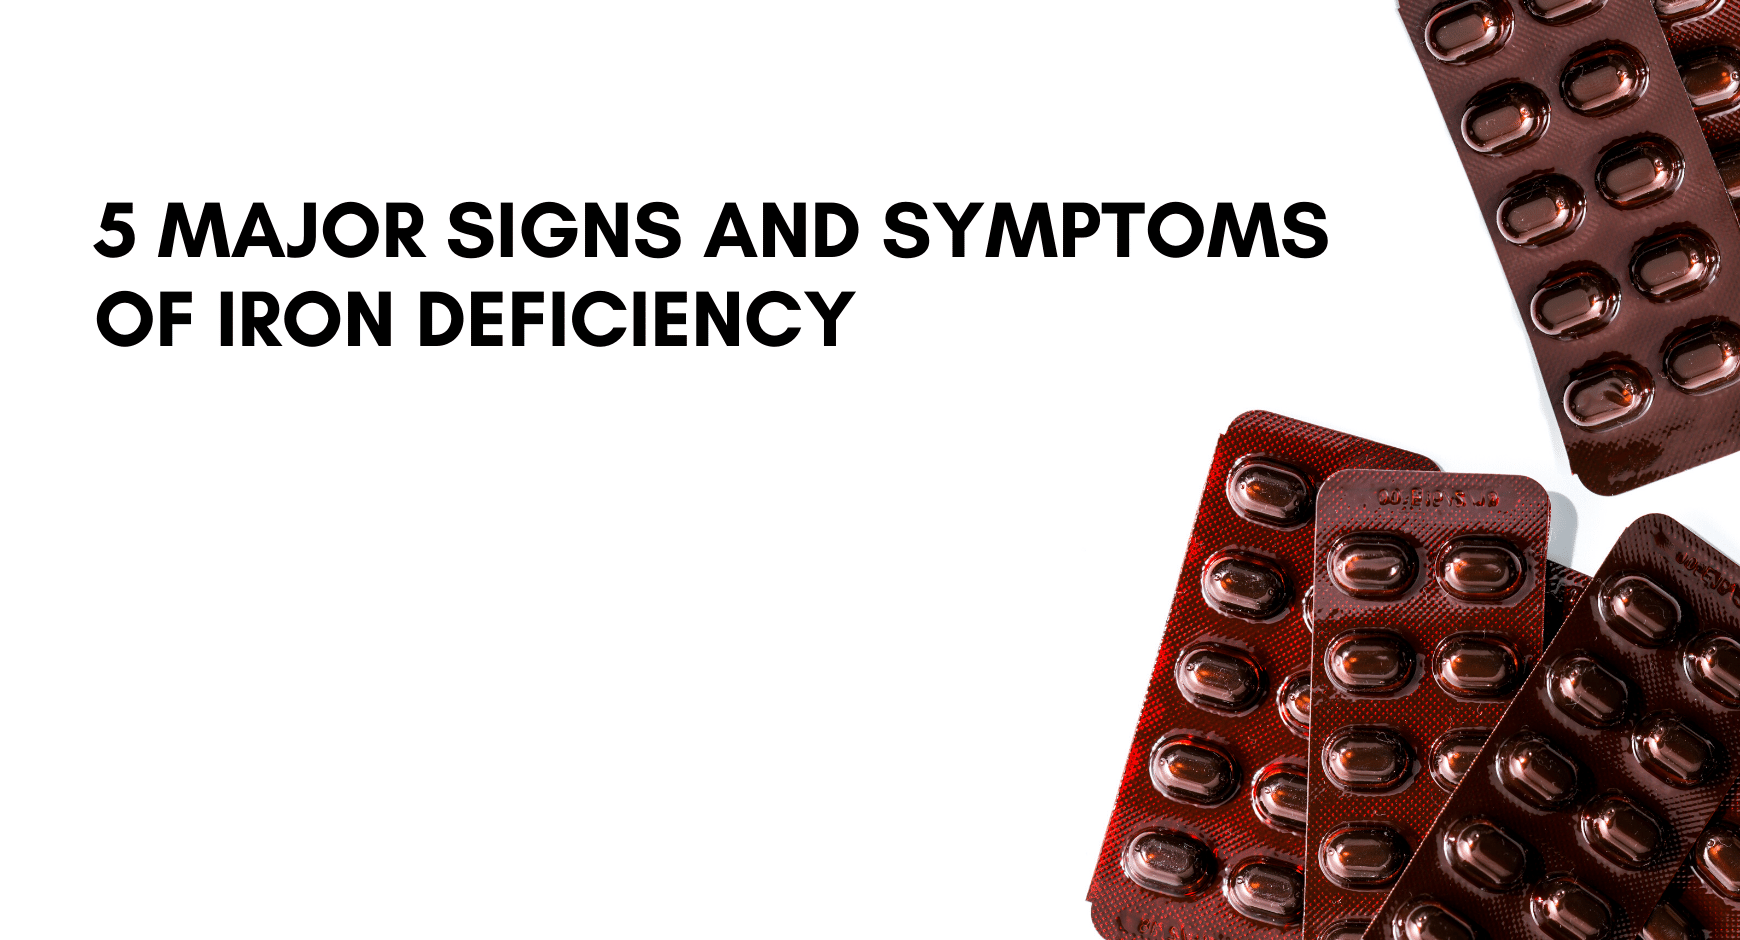 5 major signs and symptoms of iron deficiency